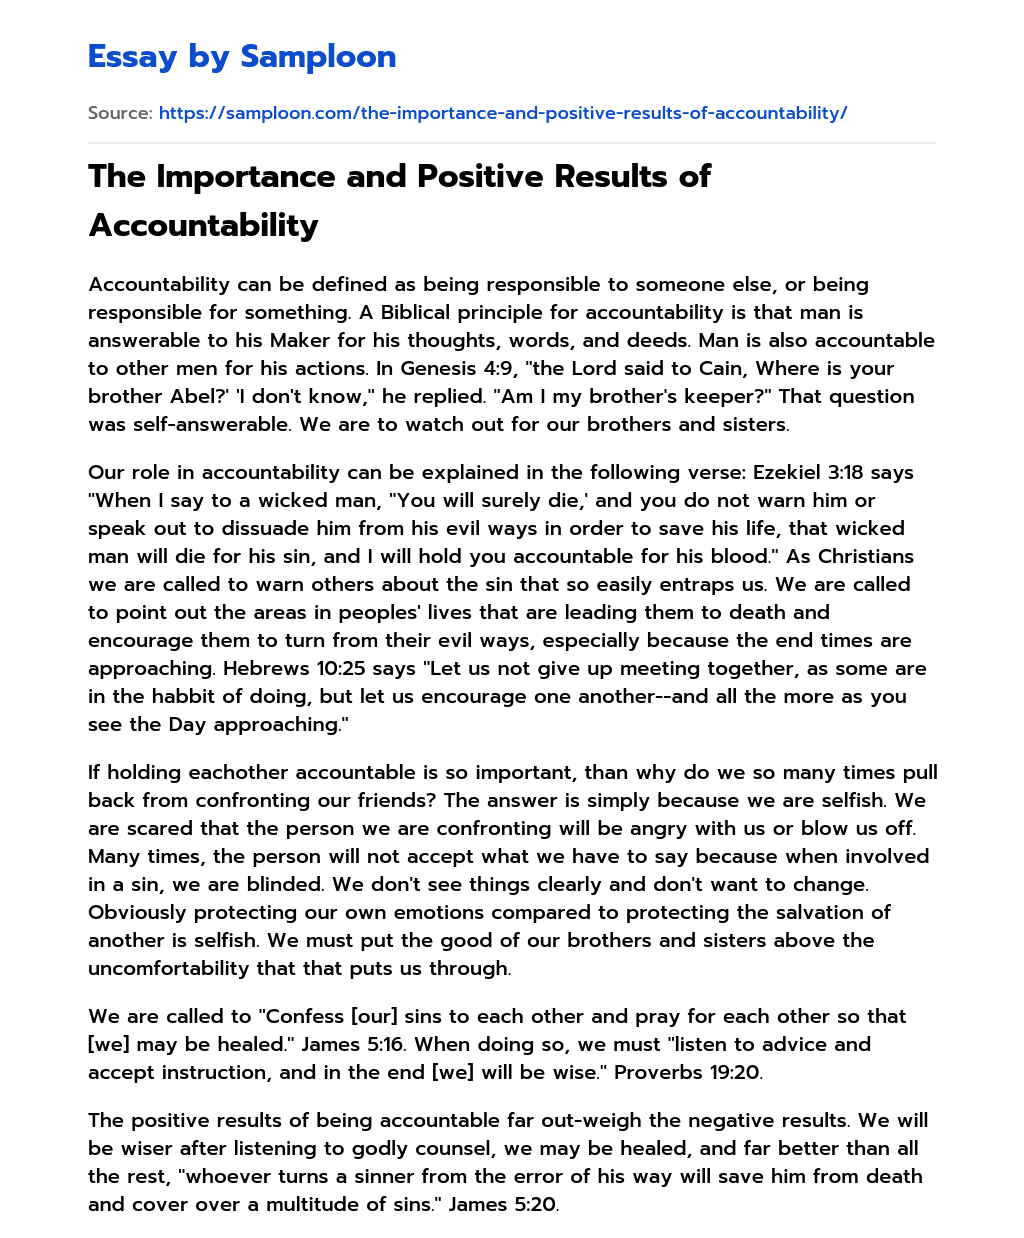 The Importance and Positive Results of Accountability essay